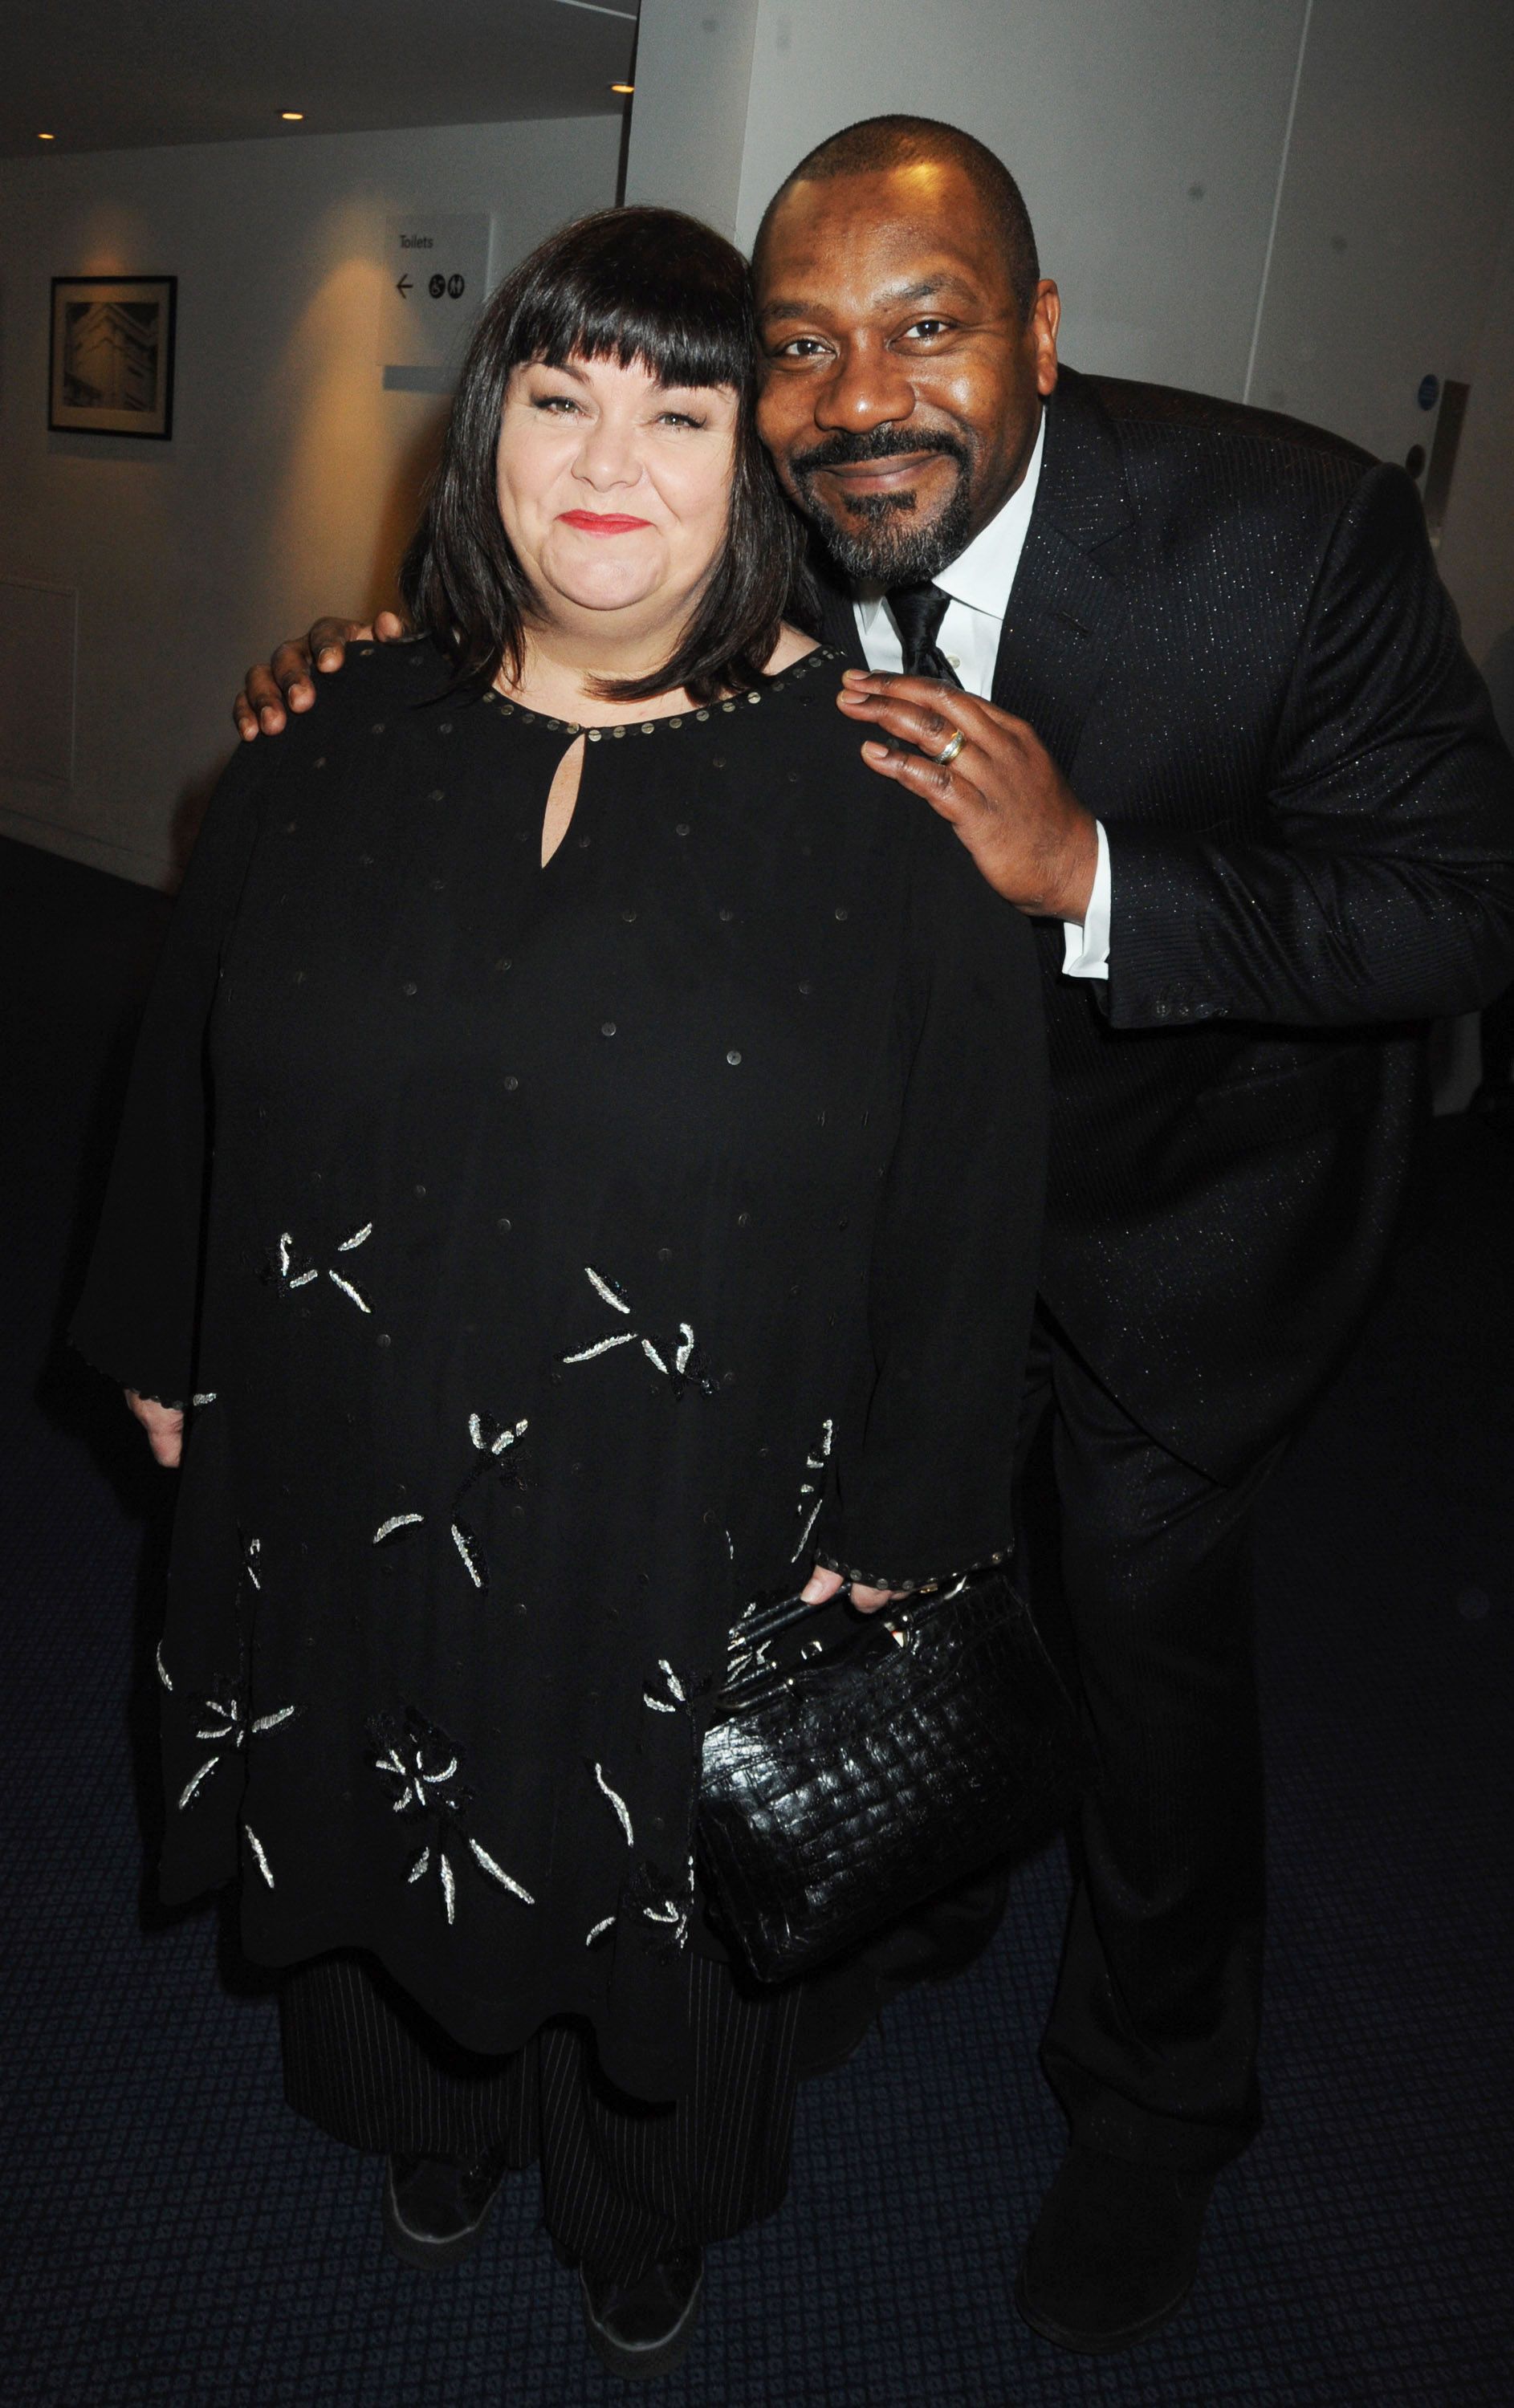 Lenny Henry and Dawn French at the reception ahead of the London Evening Standard Theatre Awards at the Royal Opera House on November 23, 2009 in London, England. | Photo: Getty Images